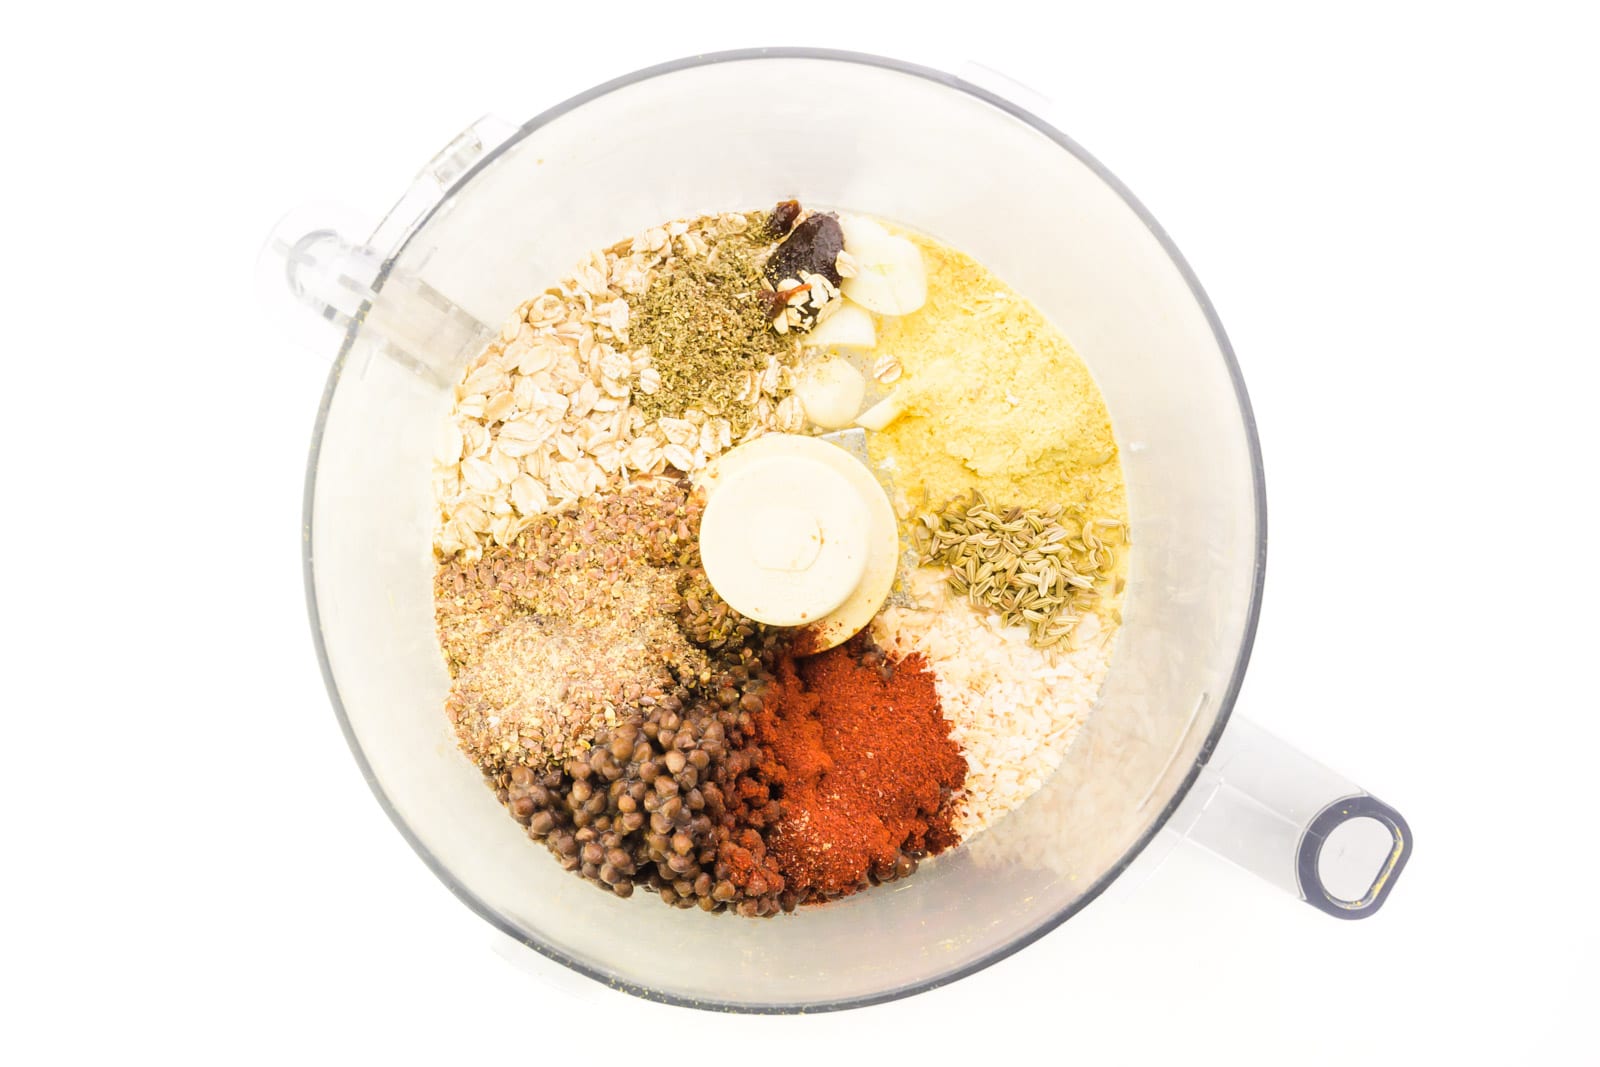 Seasonings, lentils, and other ingredients are at the bottom of a food processor bowl.